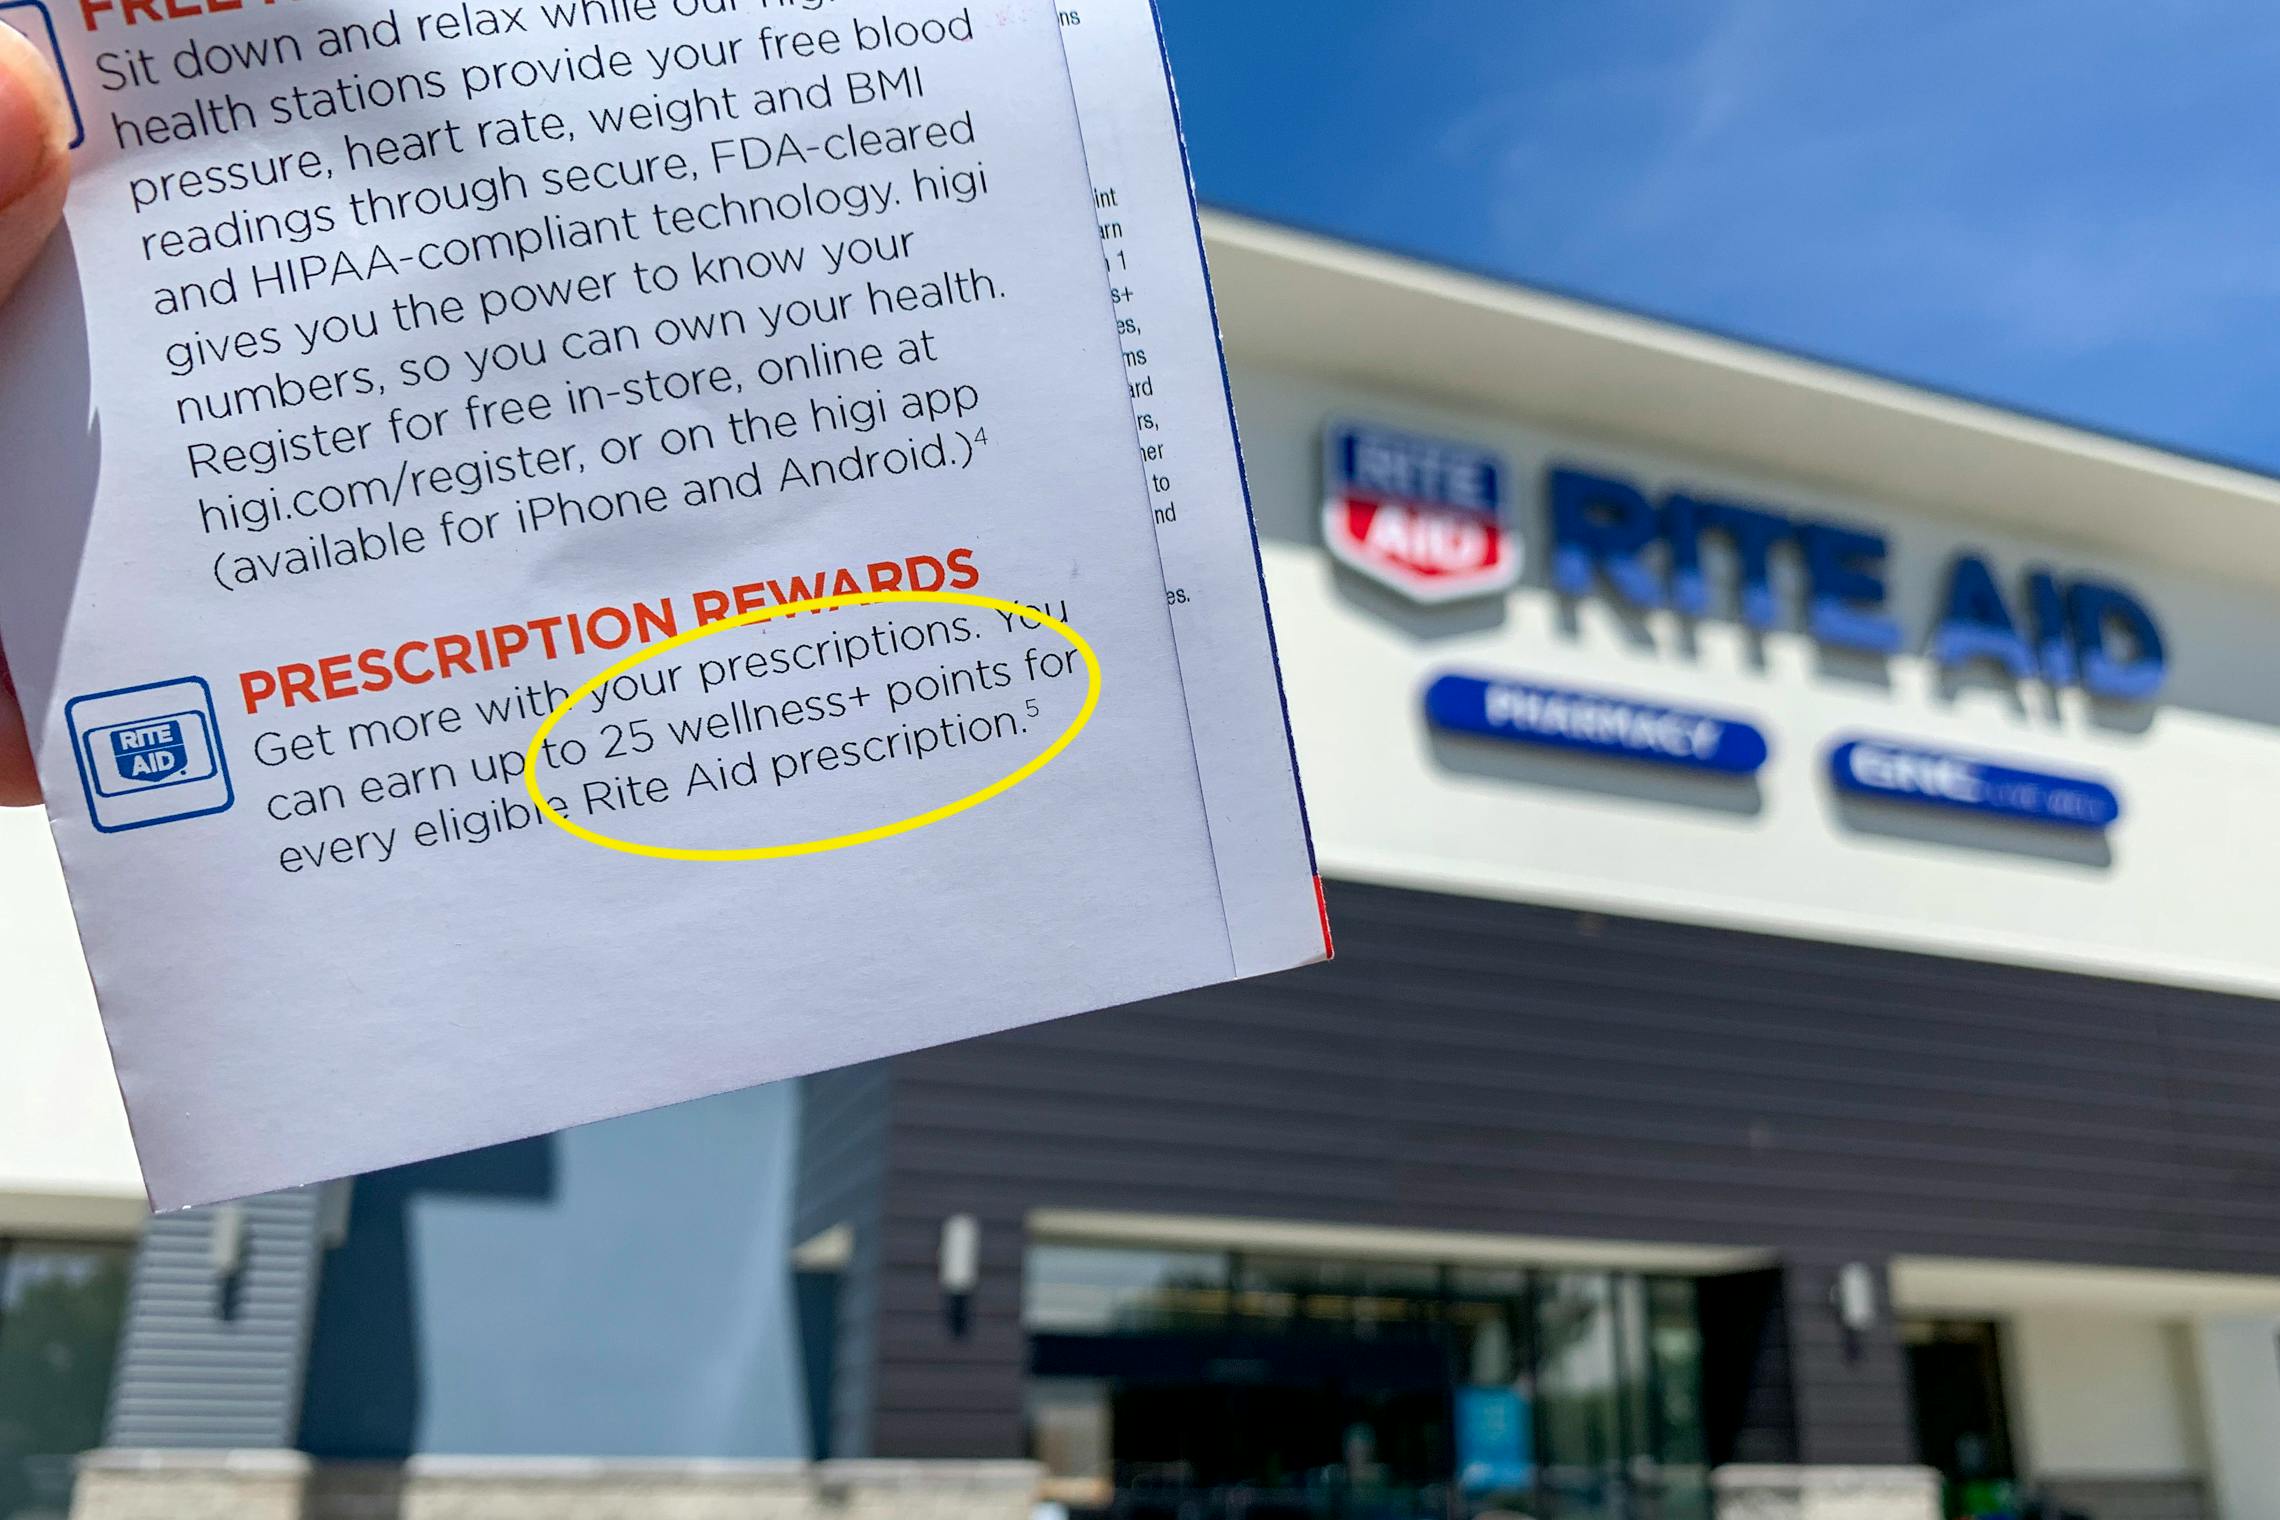 A Rite Aid rewards program pamphlet showing the prescription rewards circled in yellow.